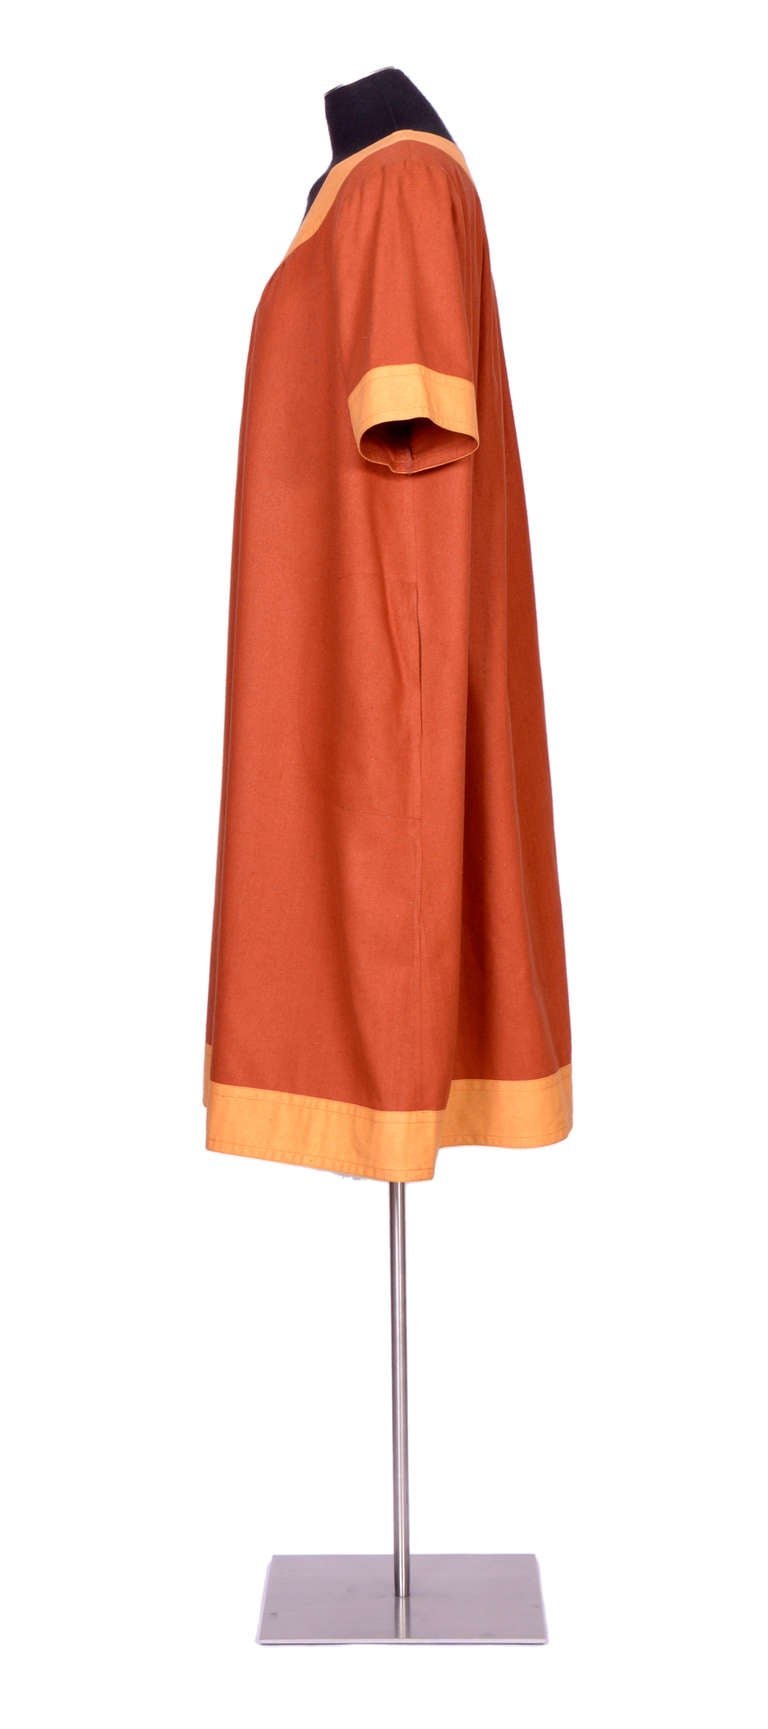 70's YSL comfortable swing dress, 2 inside pockets, made in soft strong cotton linen. Amazing to wear and perfect for summer.
Measurements taken flat in inches  SH to SH 16,5